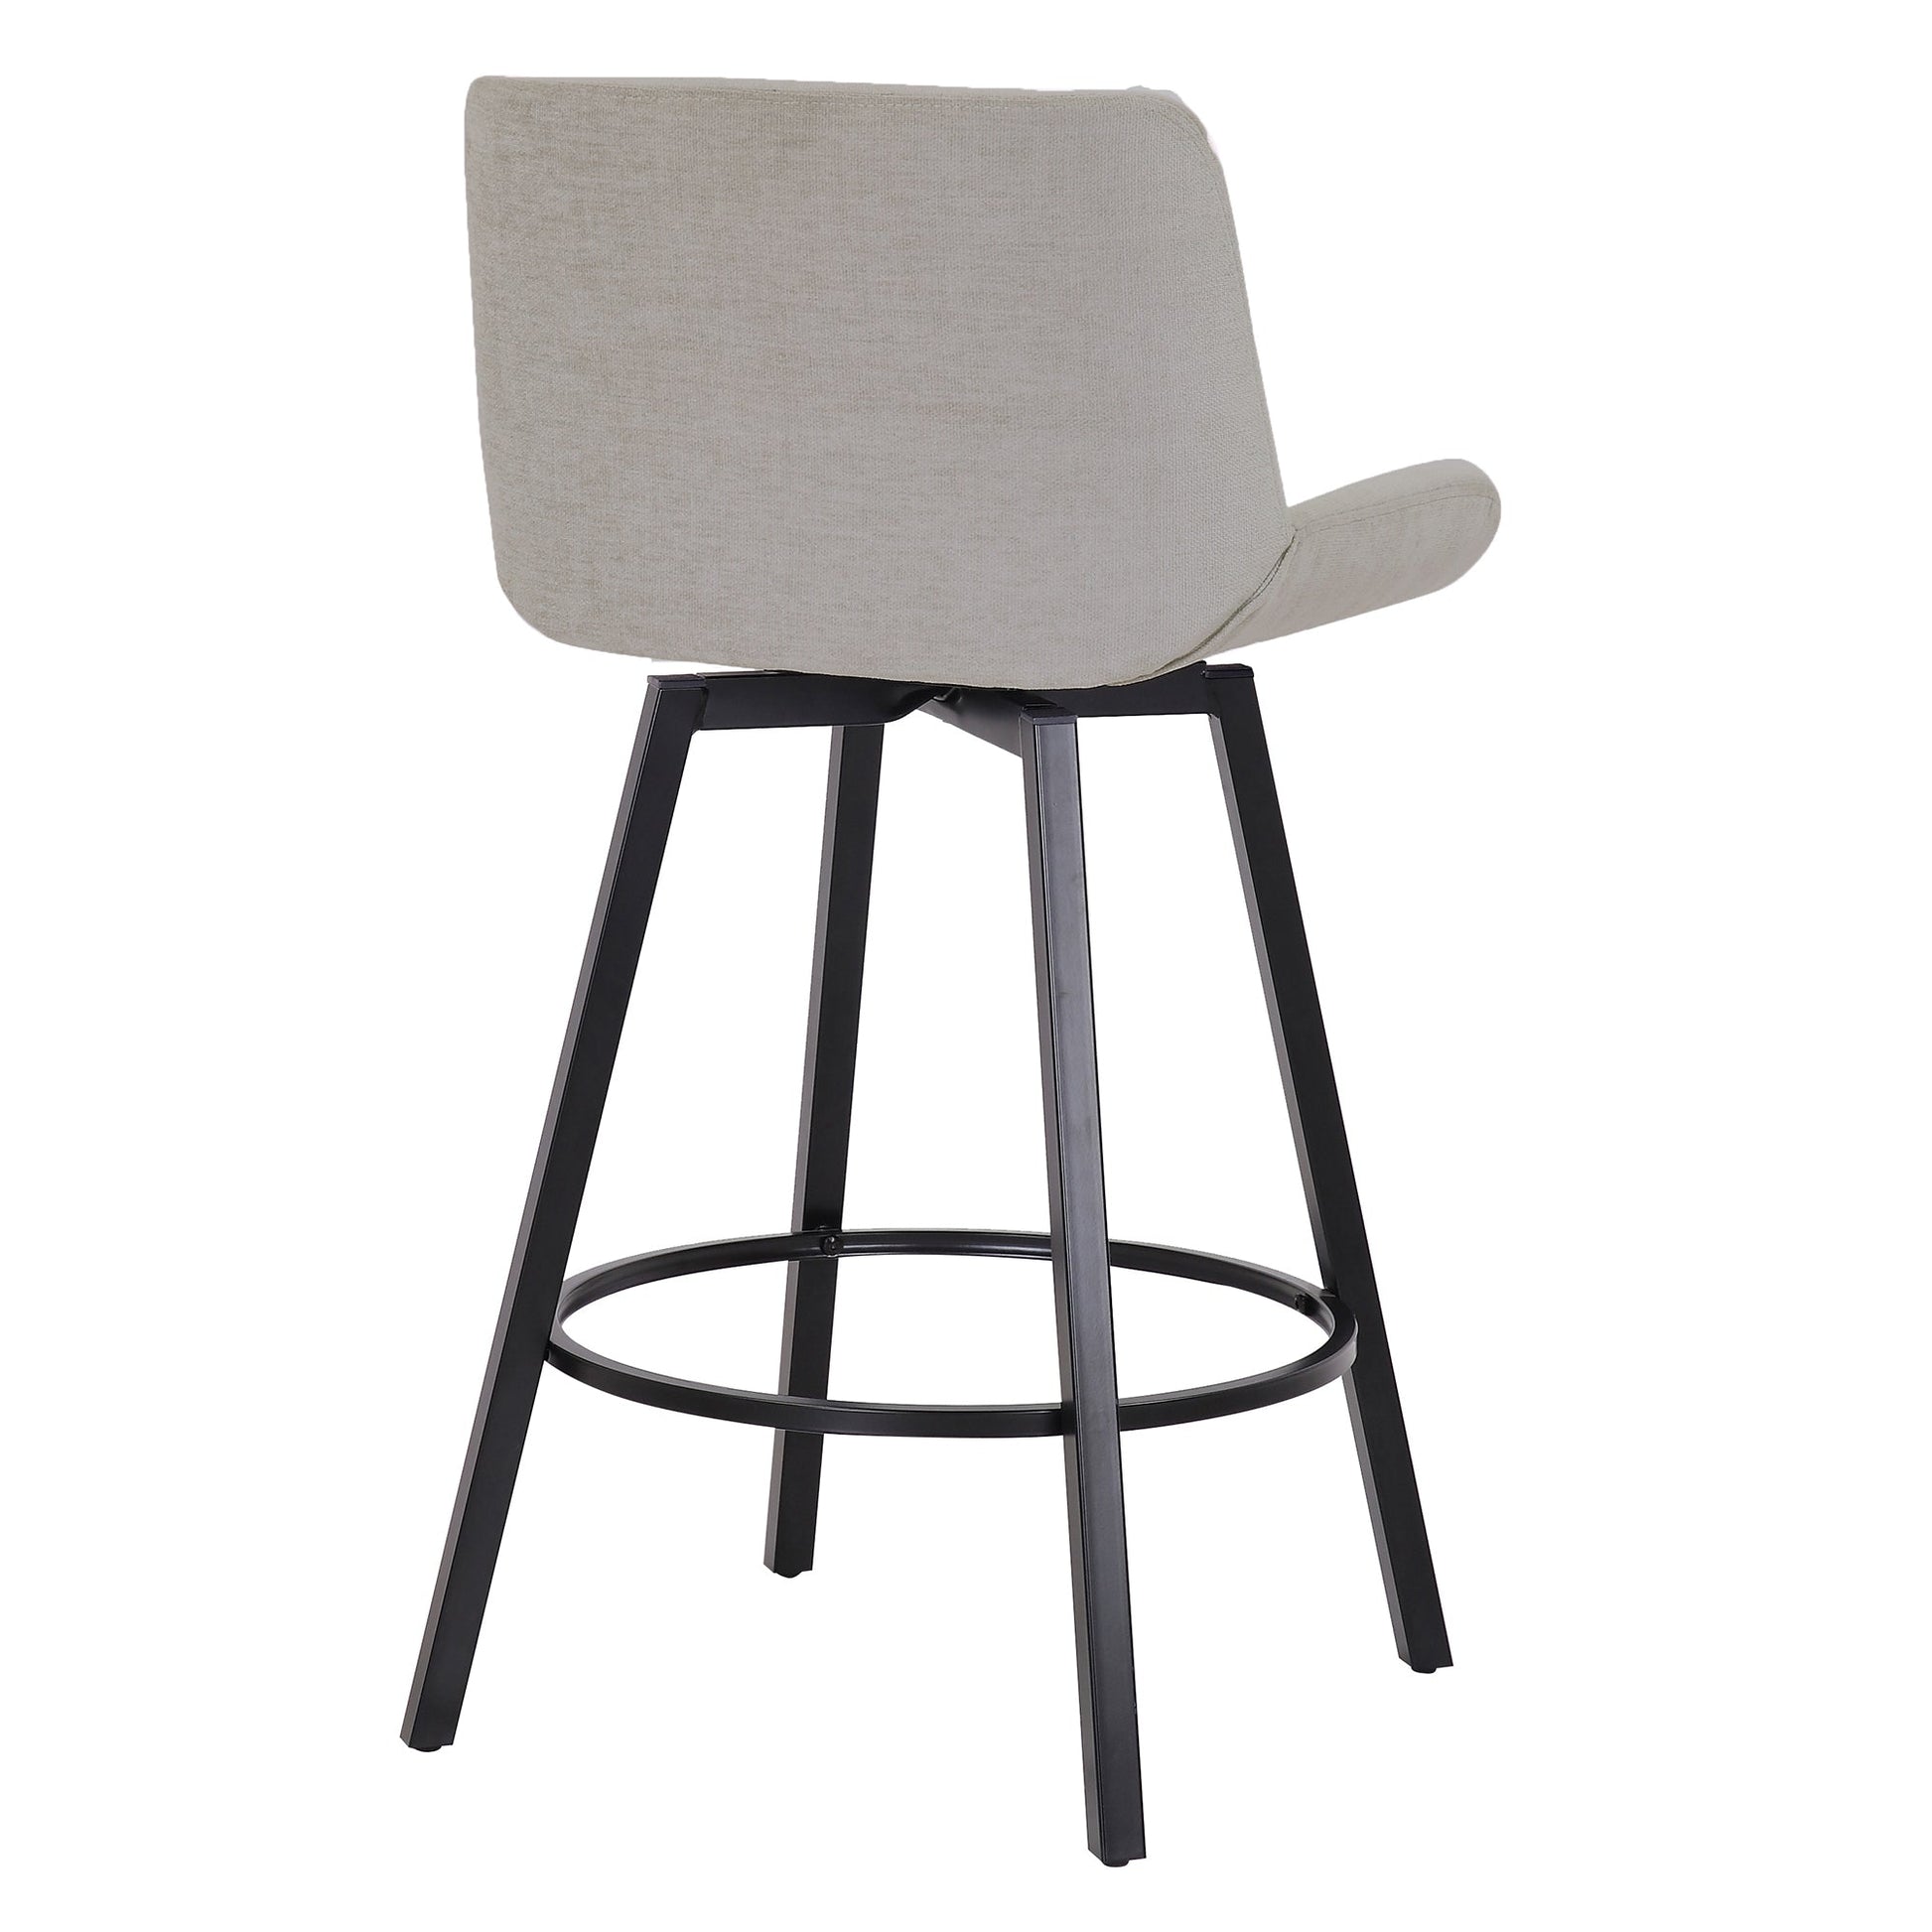 26 inch Bar Stools | Sets of 2 | Fern Grey and Black - Your Bar Stools Canada